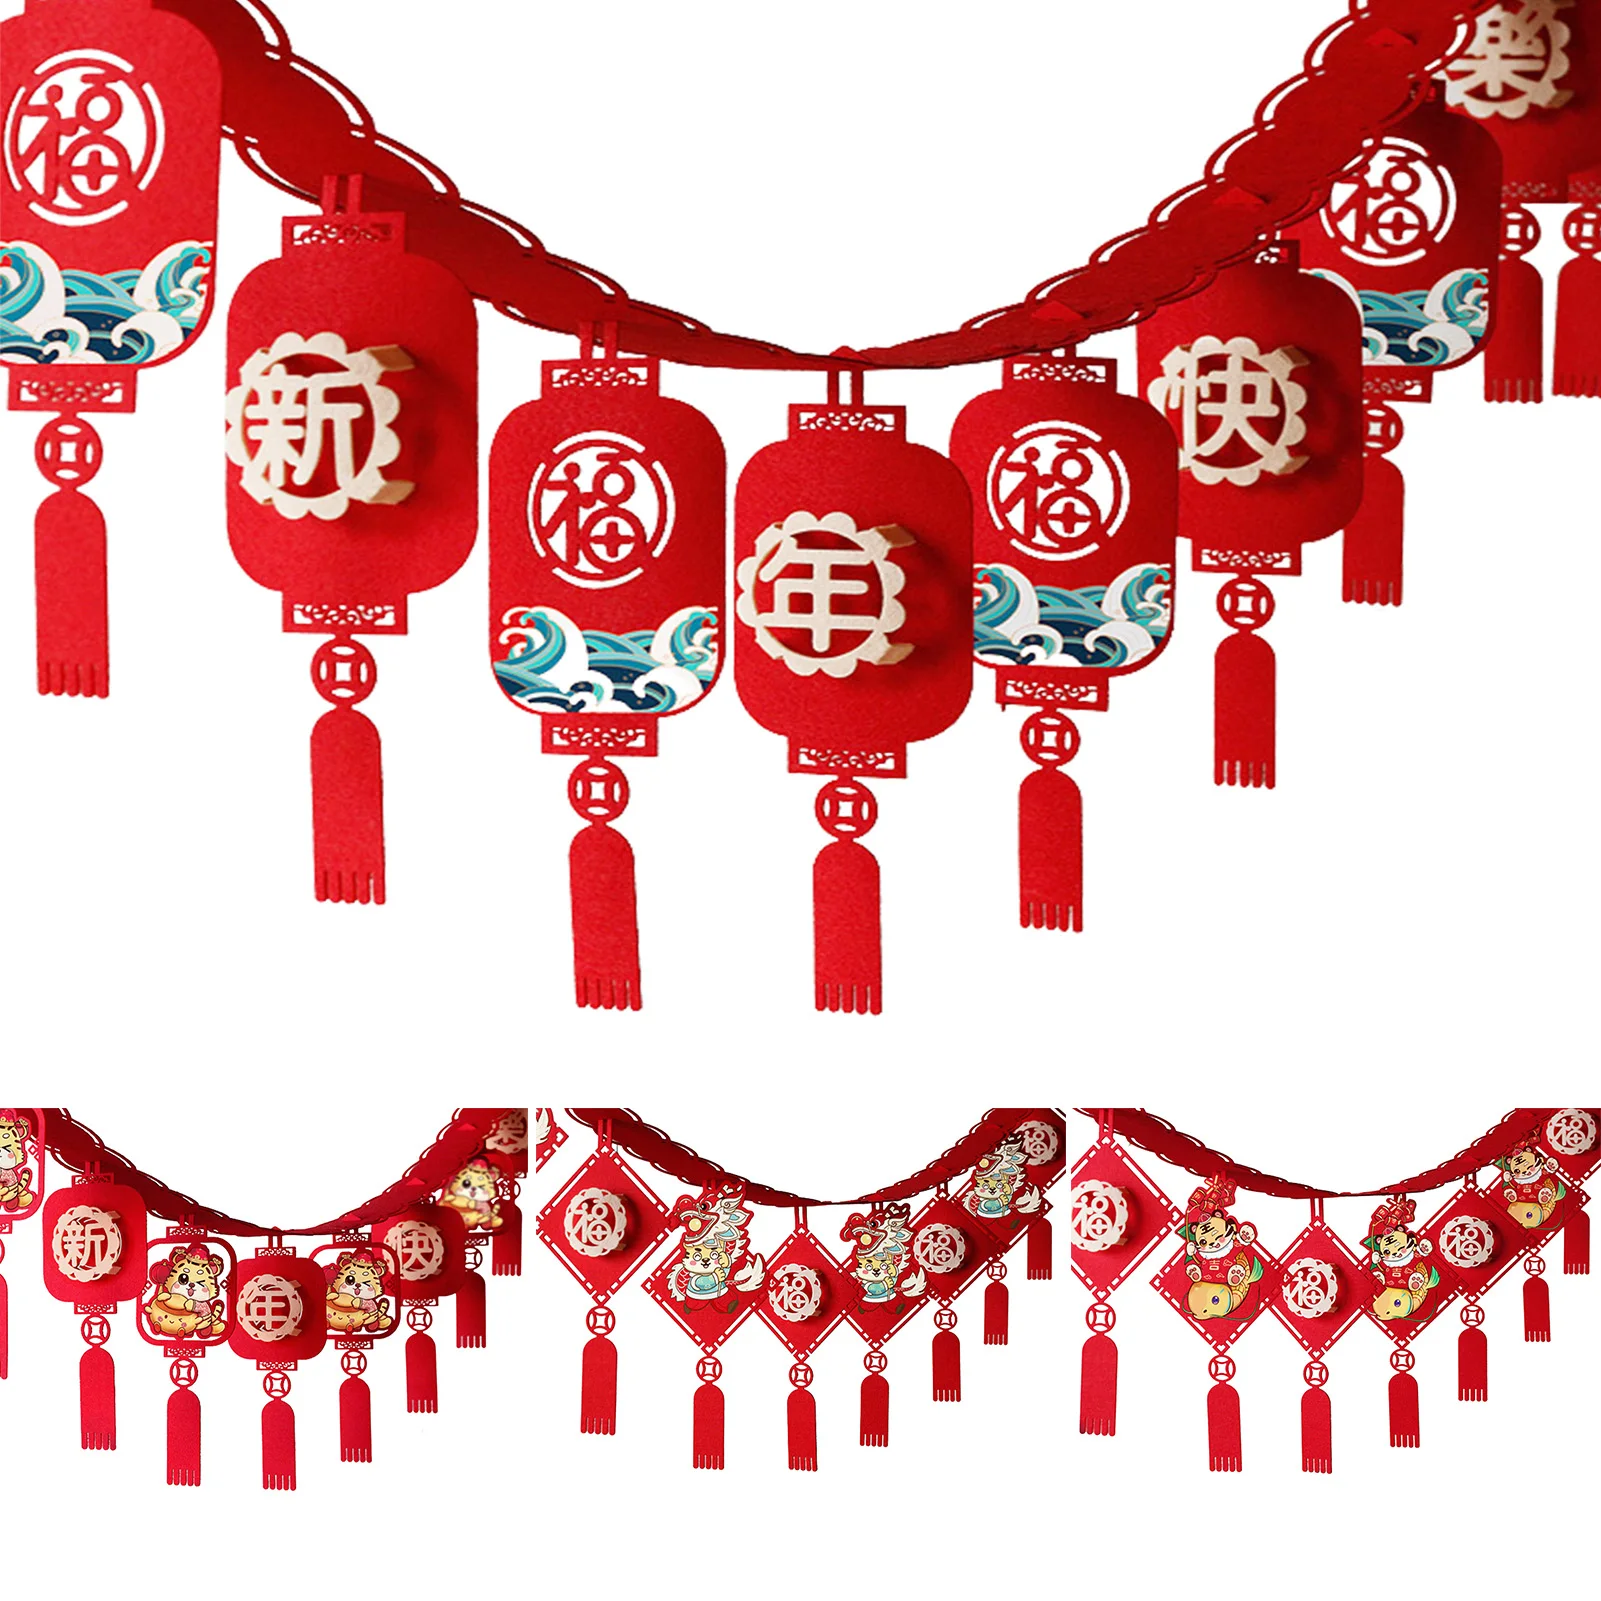 2022 Chinese New Year Decoration Pendant New Year Decorations Banners Chinese New Year Layout Props Spring Festival Decoration